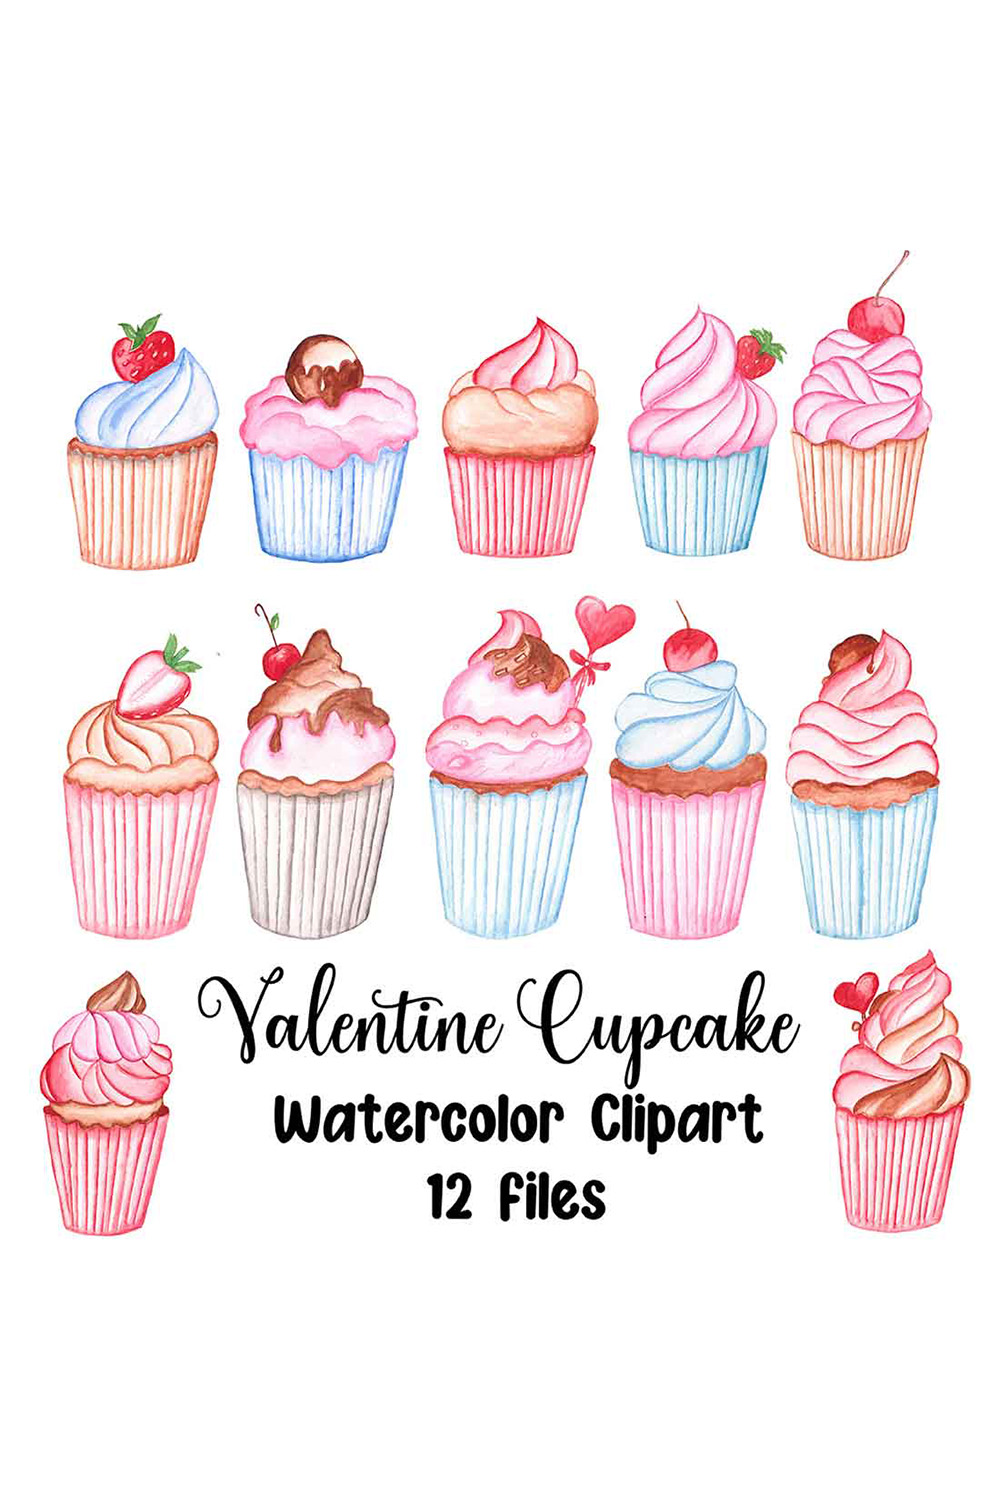 Pack of enchanting watercolor images of cupcakes